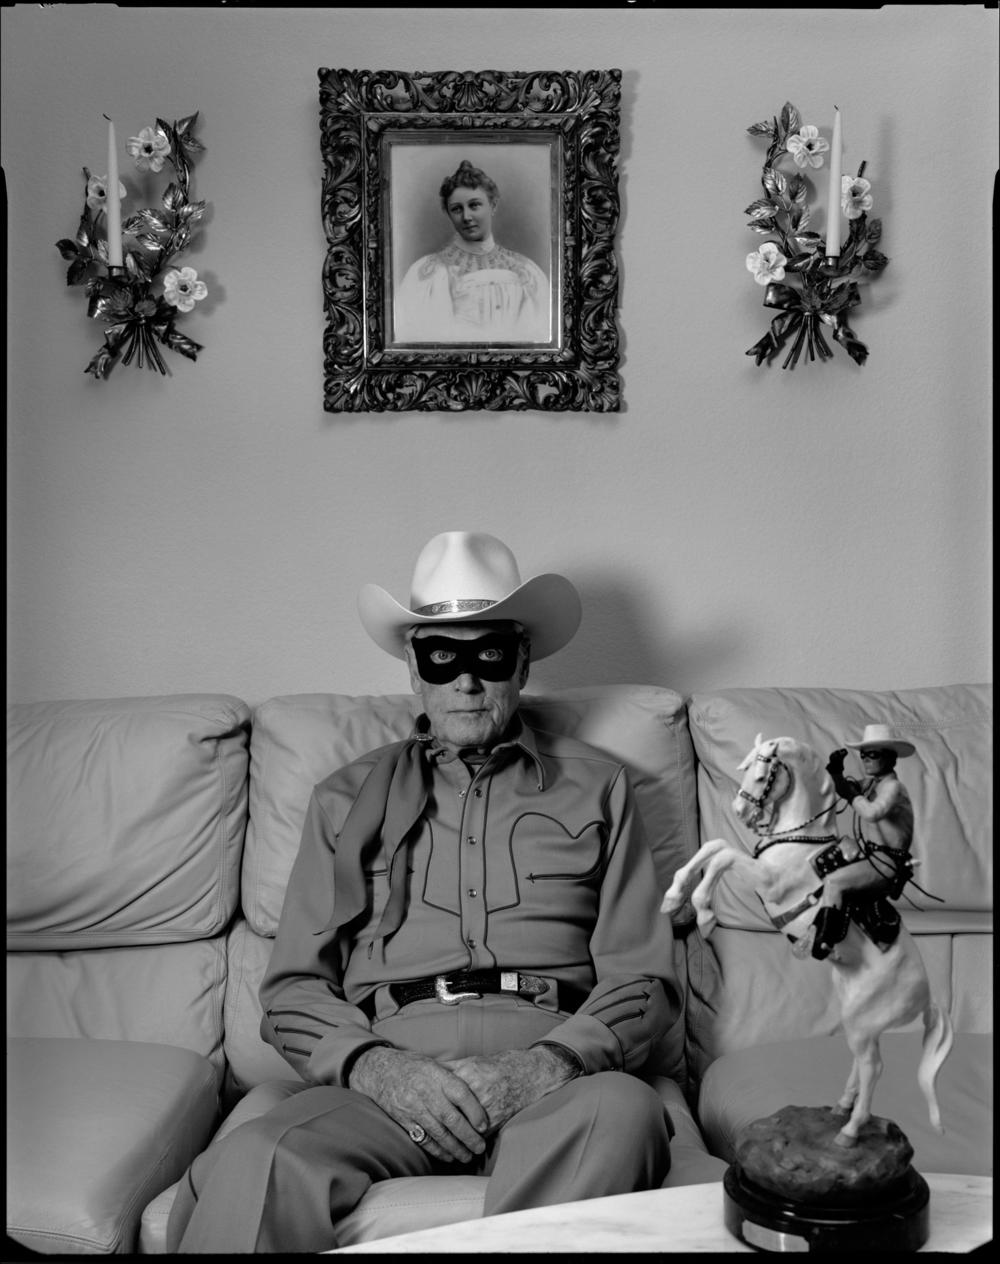 Clayton Moore, the former Lone Ranger, at home. Los Angeles, 1992.